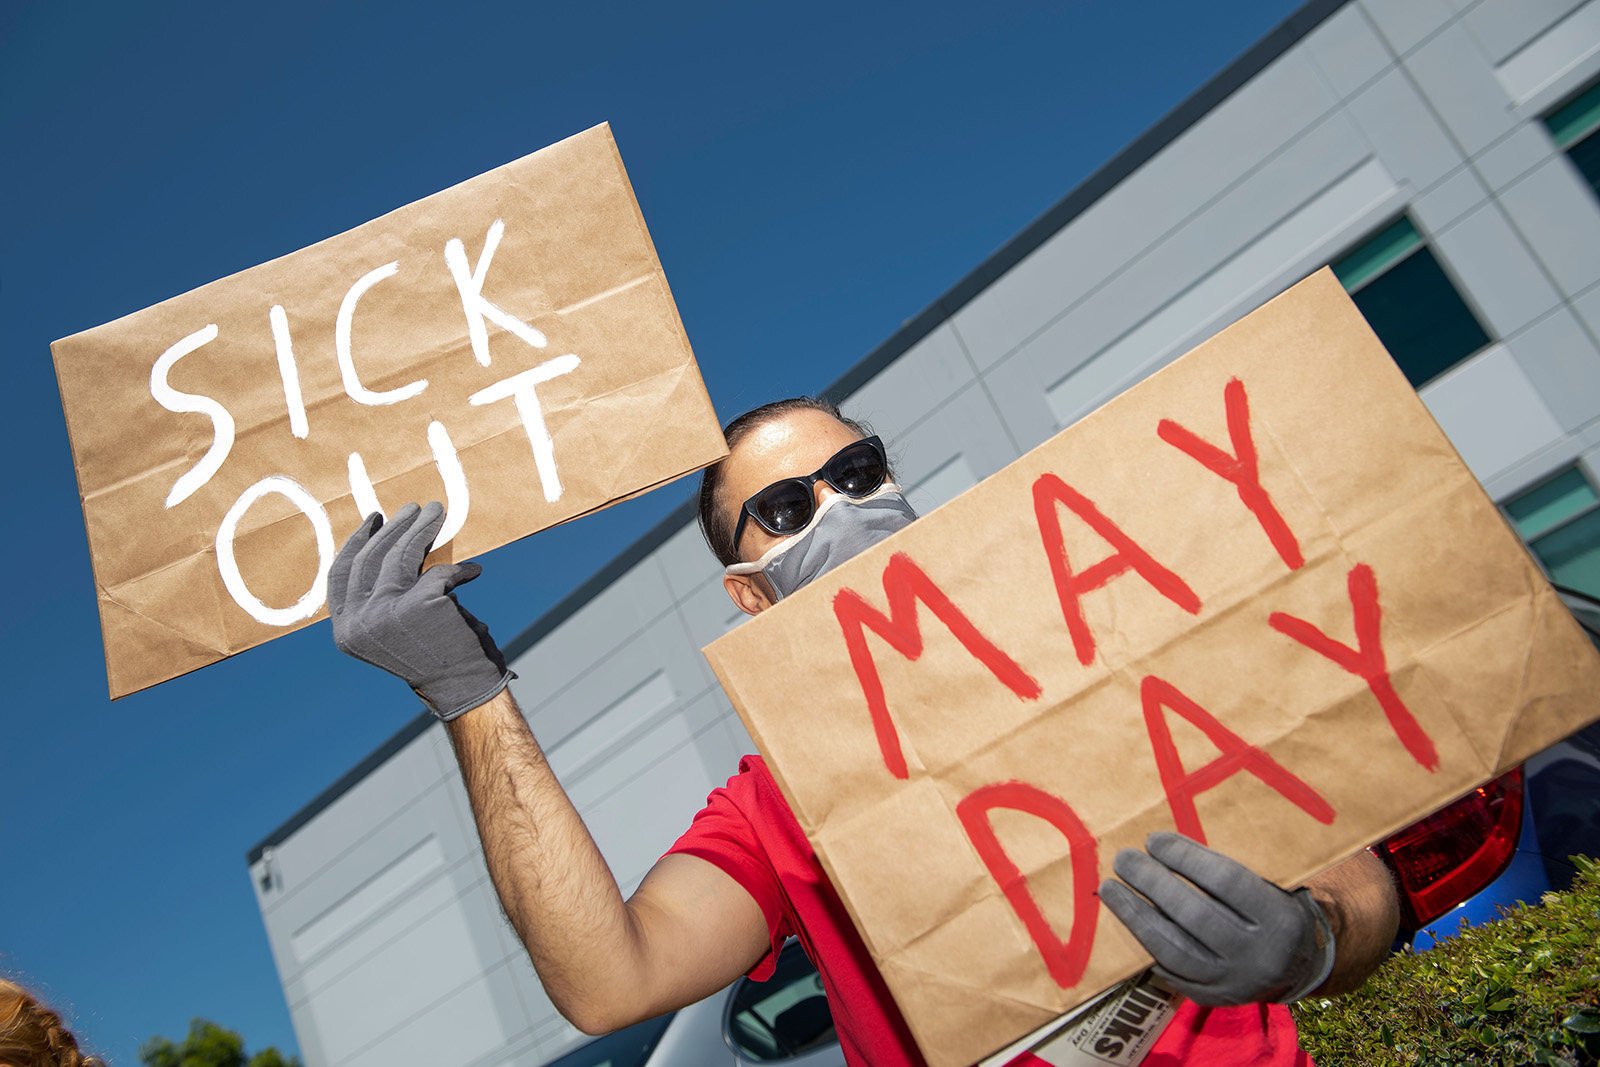 US employees of Amazon, its supermarket subsidiary Whole Foods and supermarket delivery services strike on May 1, 2020, in Hawthorne, California, to protest at insufficient workplace protection against Covid-19. Photo: AFP